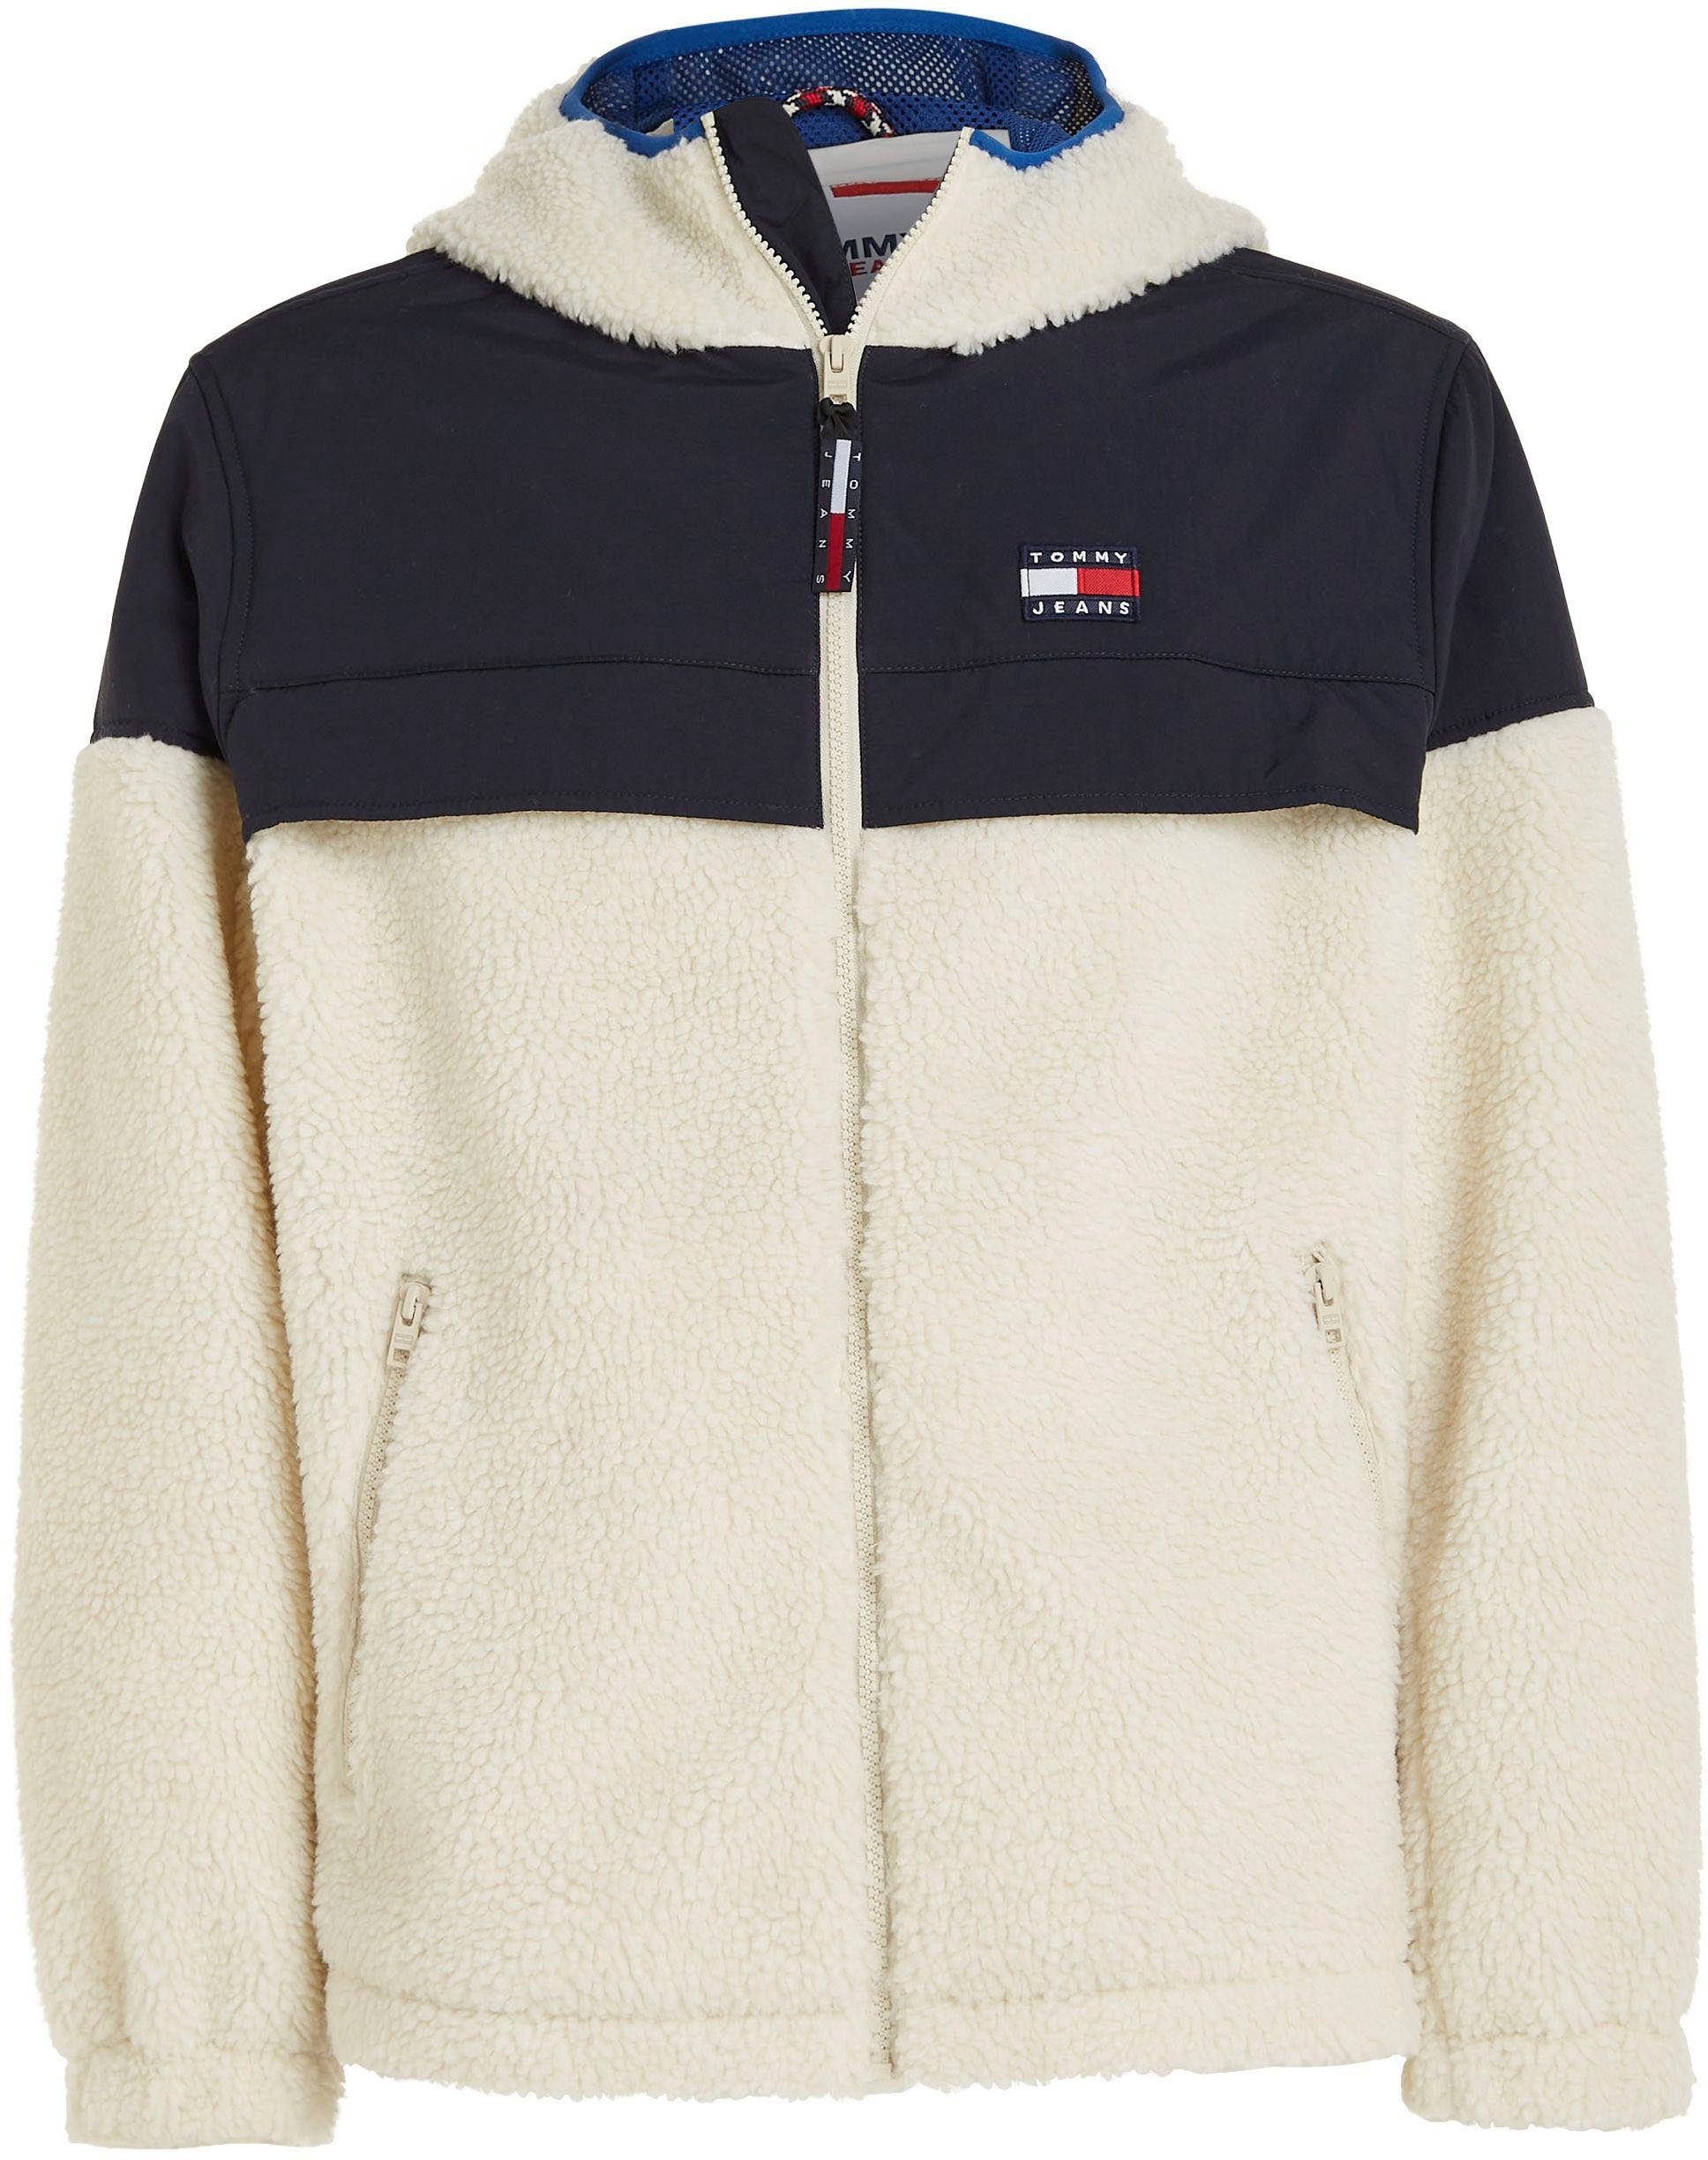 Tommy Jeans Fellimitatjacke White Ancient Mix JACKET SHERPA TJM MIX CHICAGO